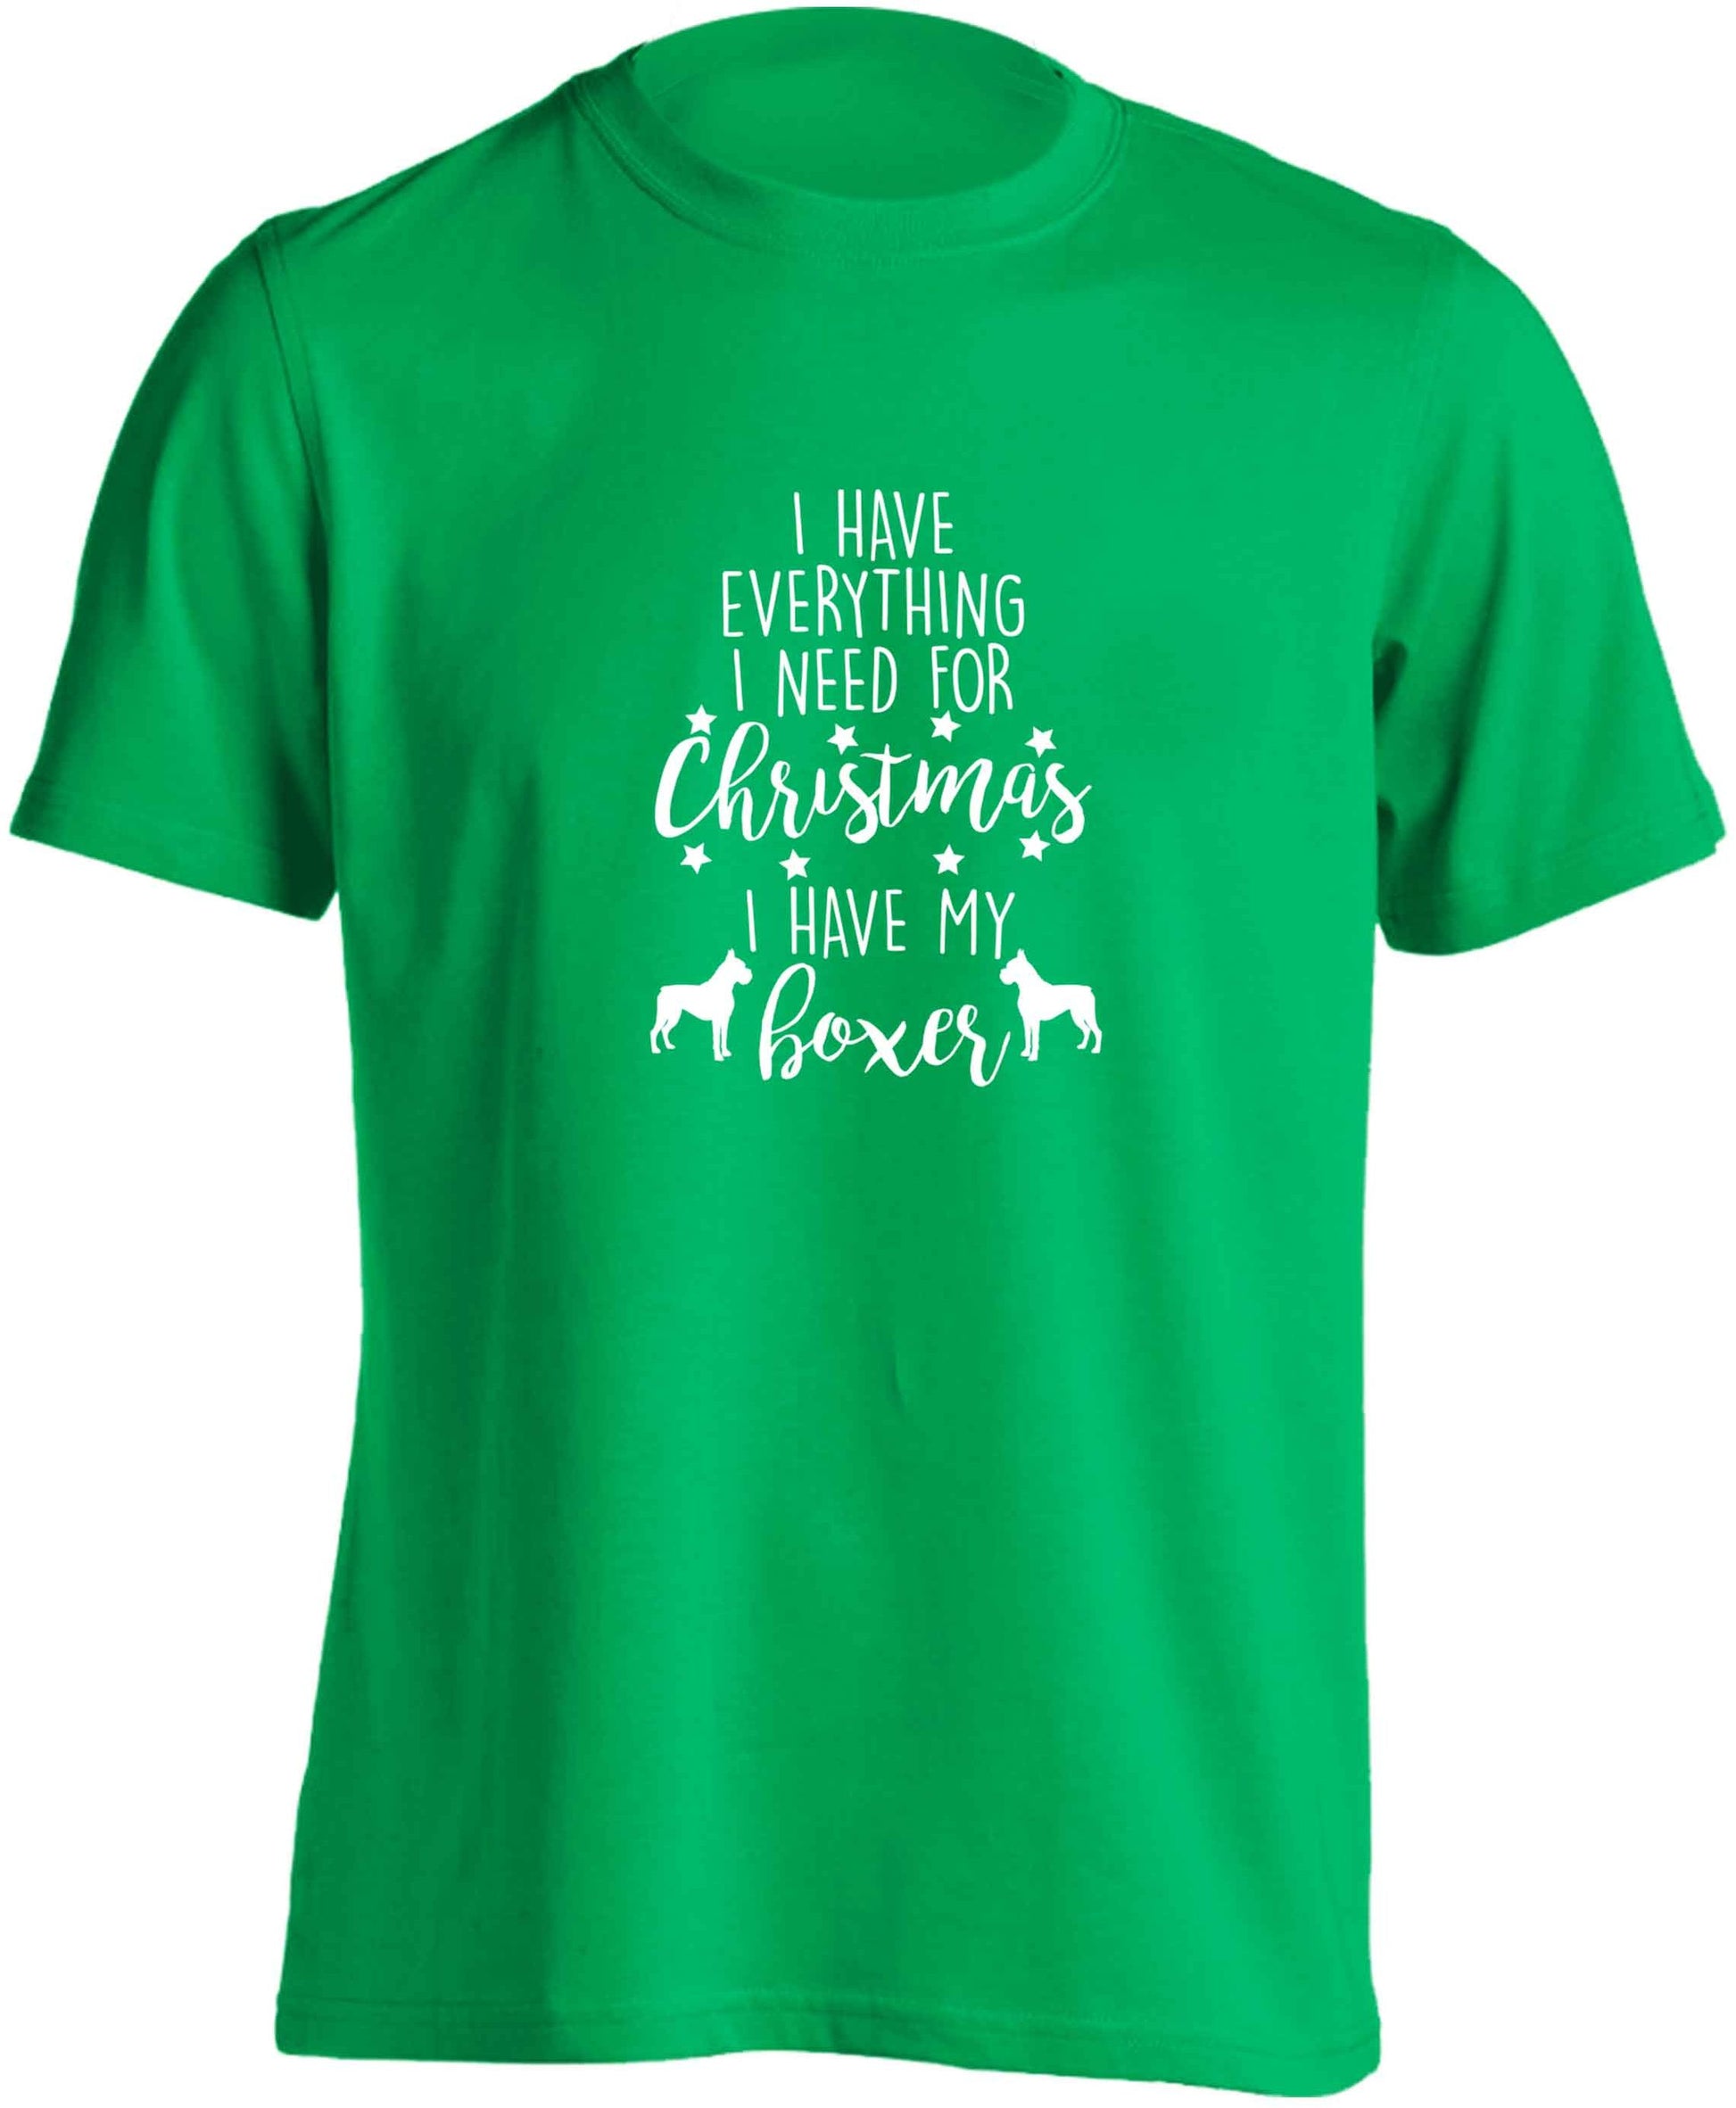 I have everything I need for Christmas I have my boxer adults unisex green Tshirt 2XL